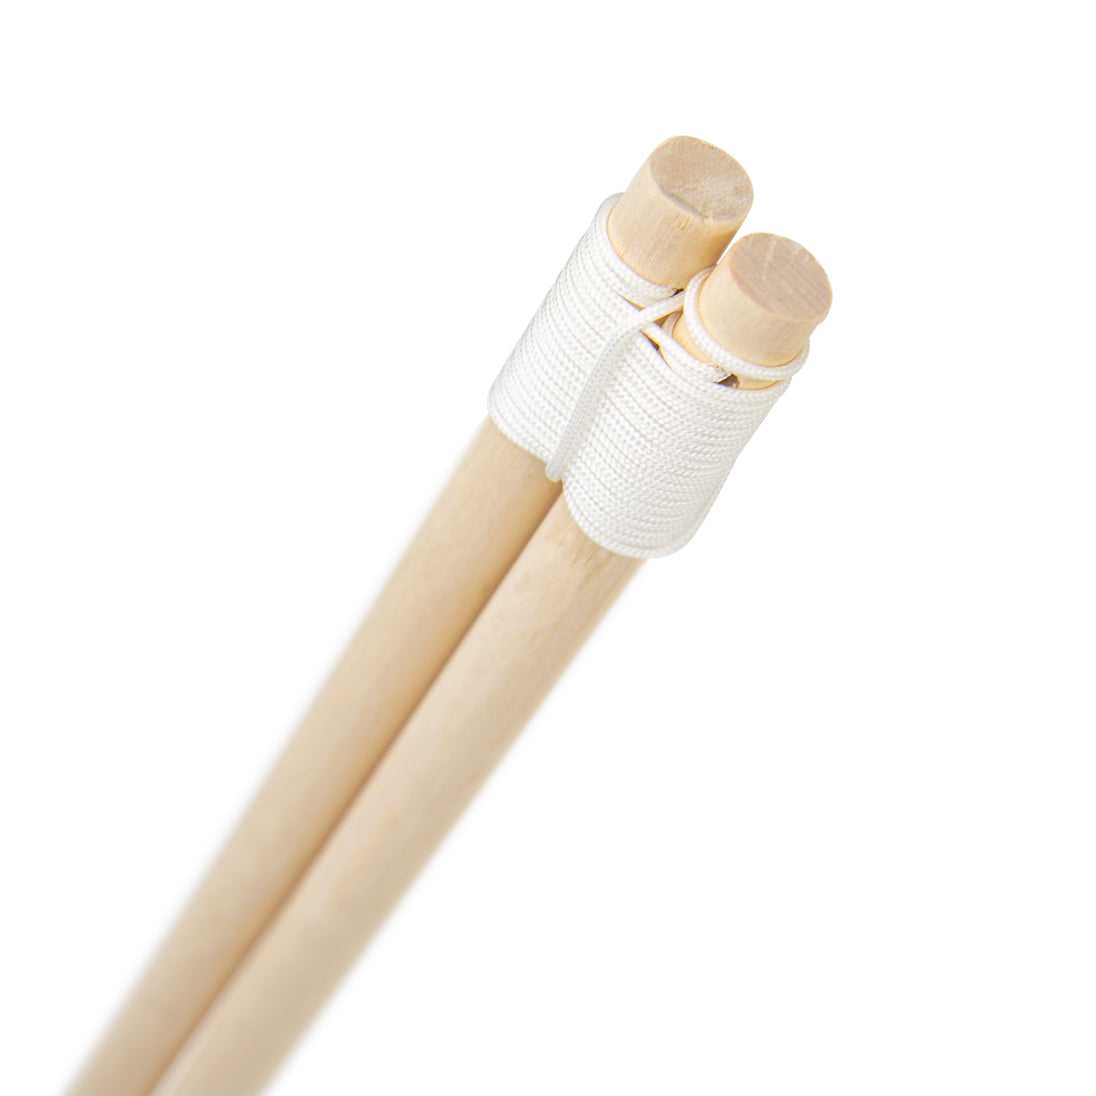 Close-up of ends of Wooden Sticks 